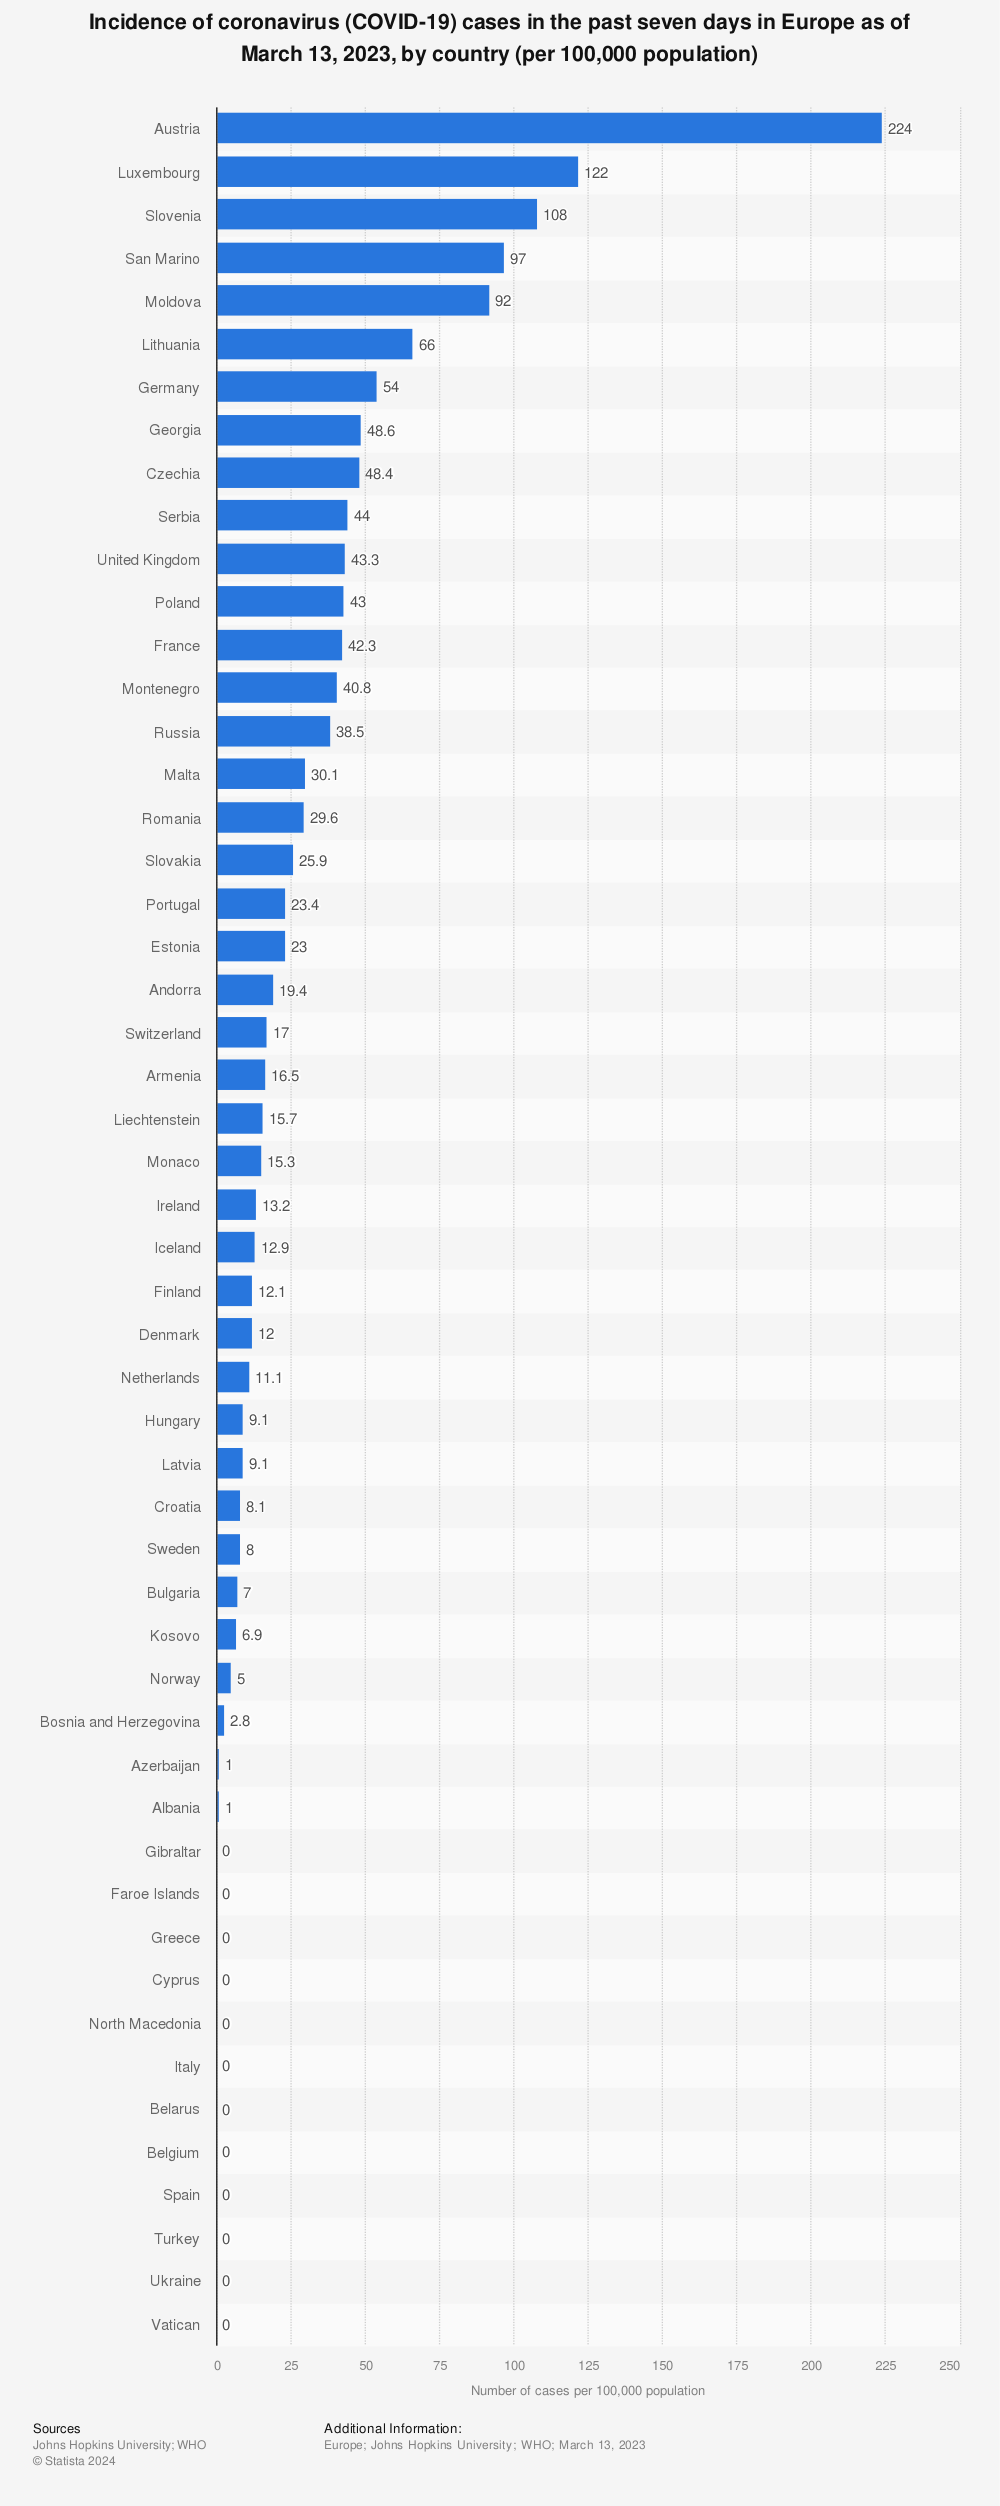 Statistic: Incidence of coronavirus (COVID-19) cases in the past seven days in Europe as of December 21, 2021, by country (per 100,000 population) | Statista